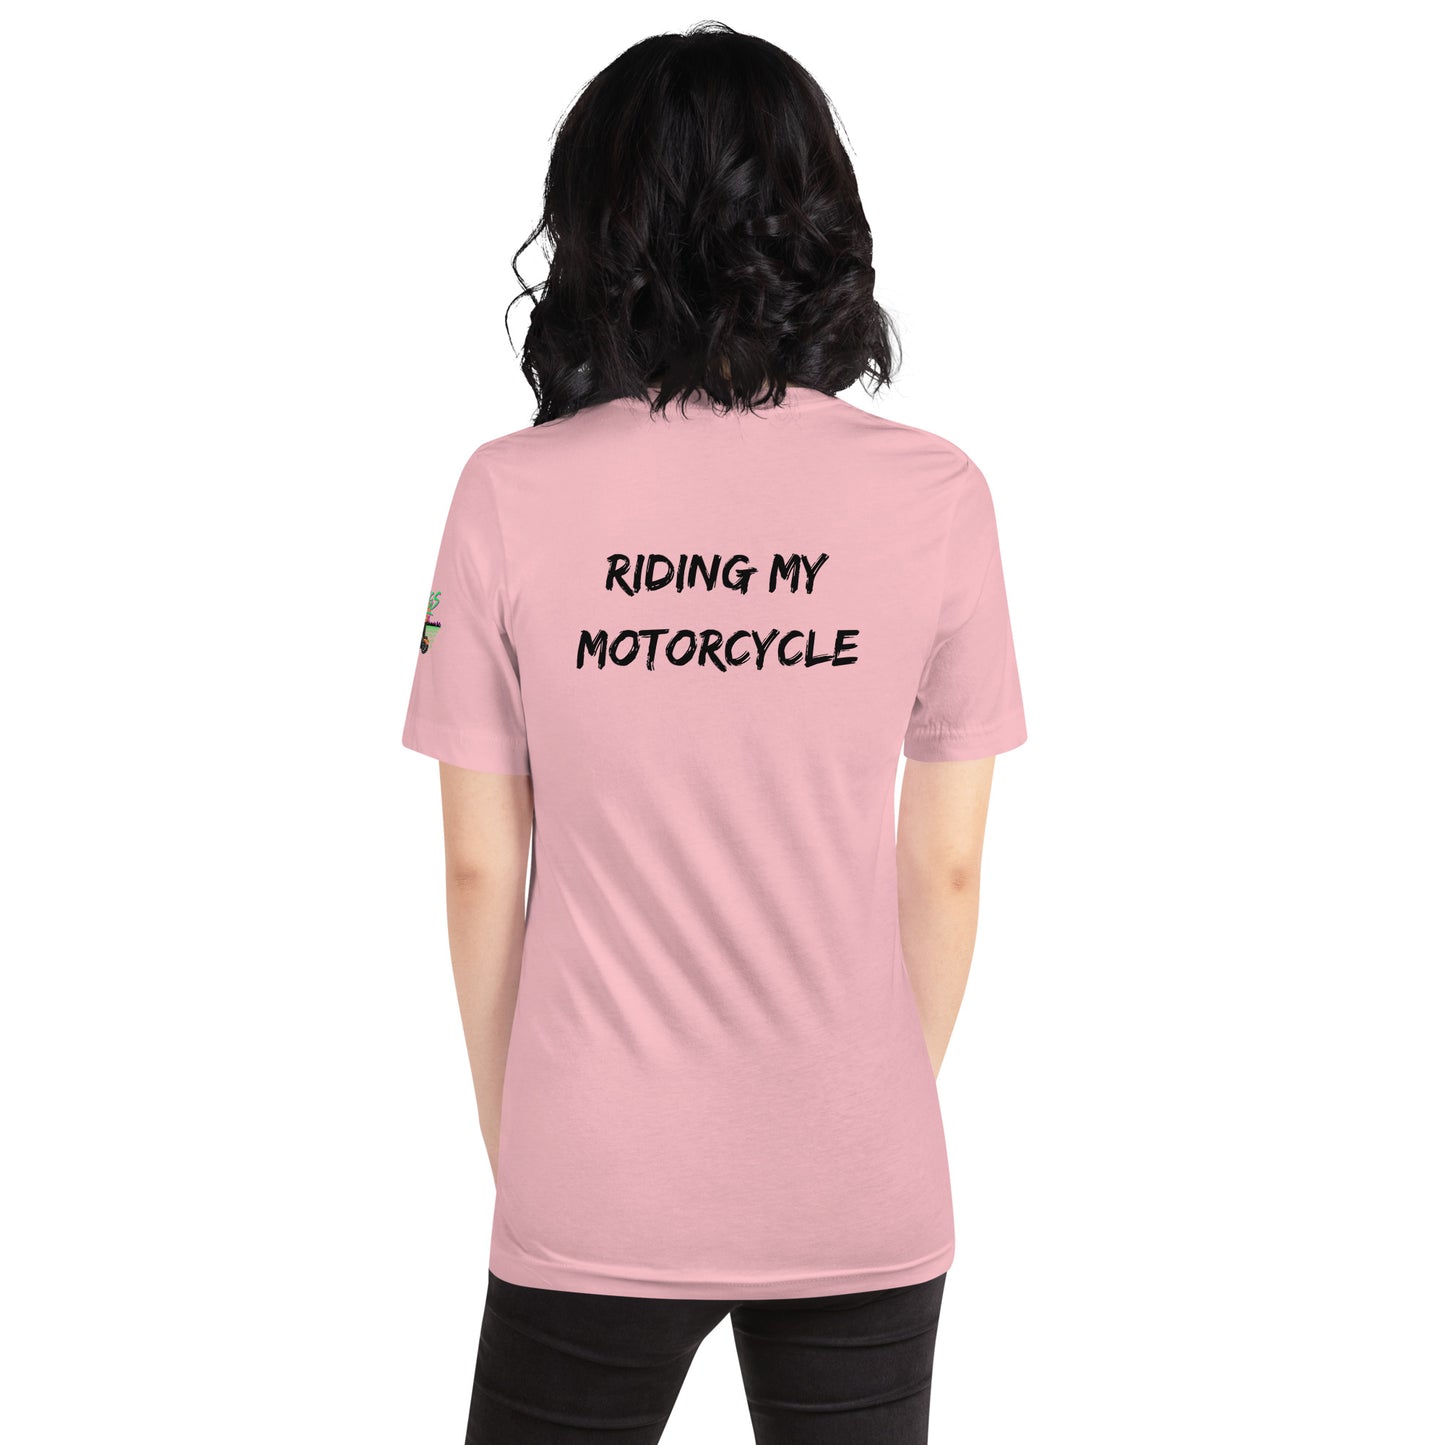 I'm Busy Riding My Motorcycle Unisex Soft T-shirt